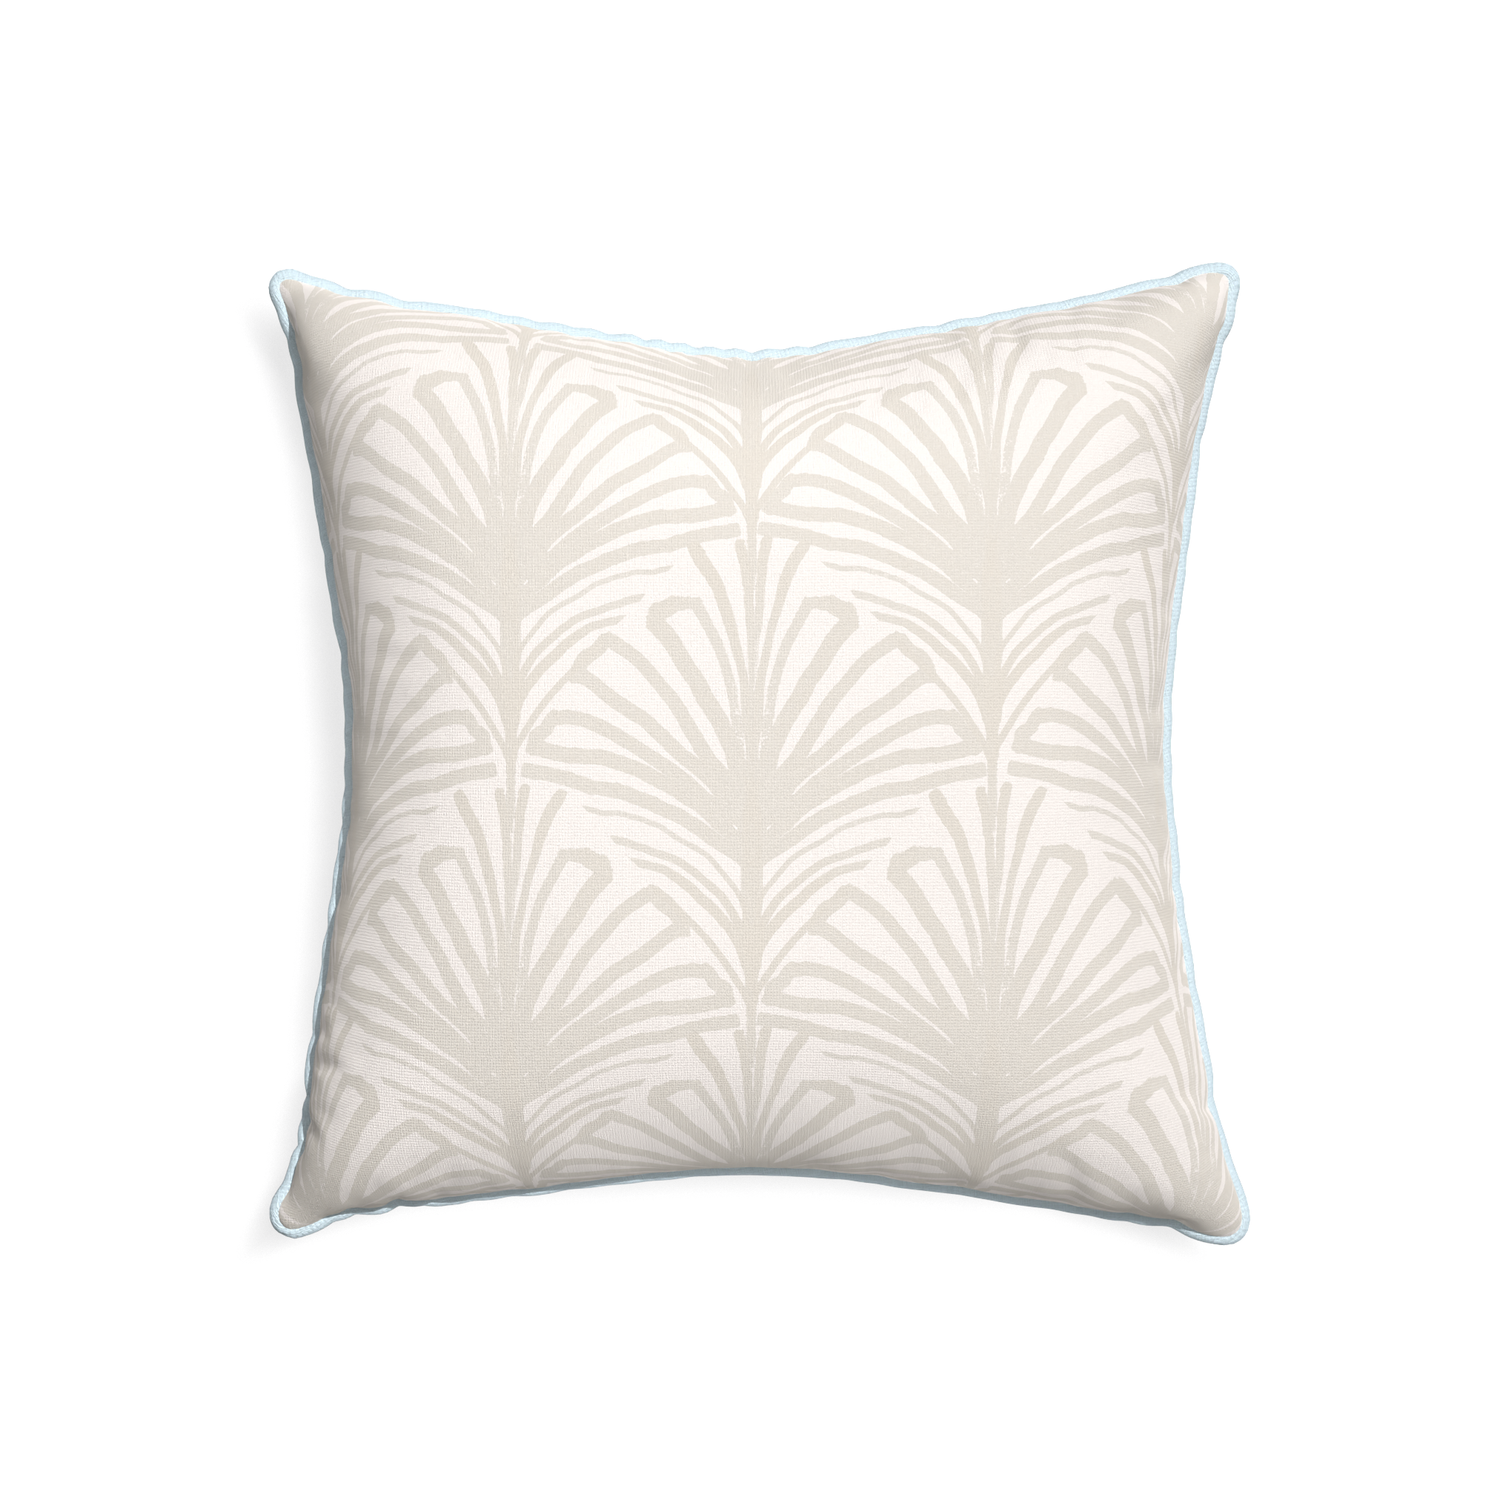 22-square suzy sand custom pillow with powder piping on white background